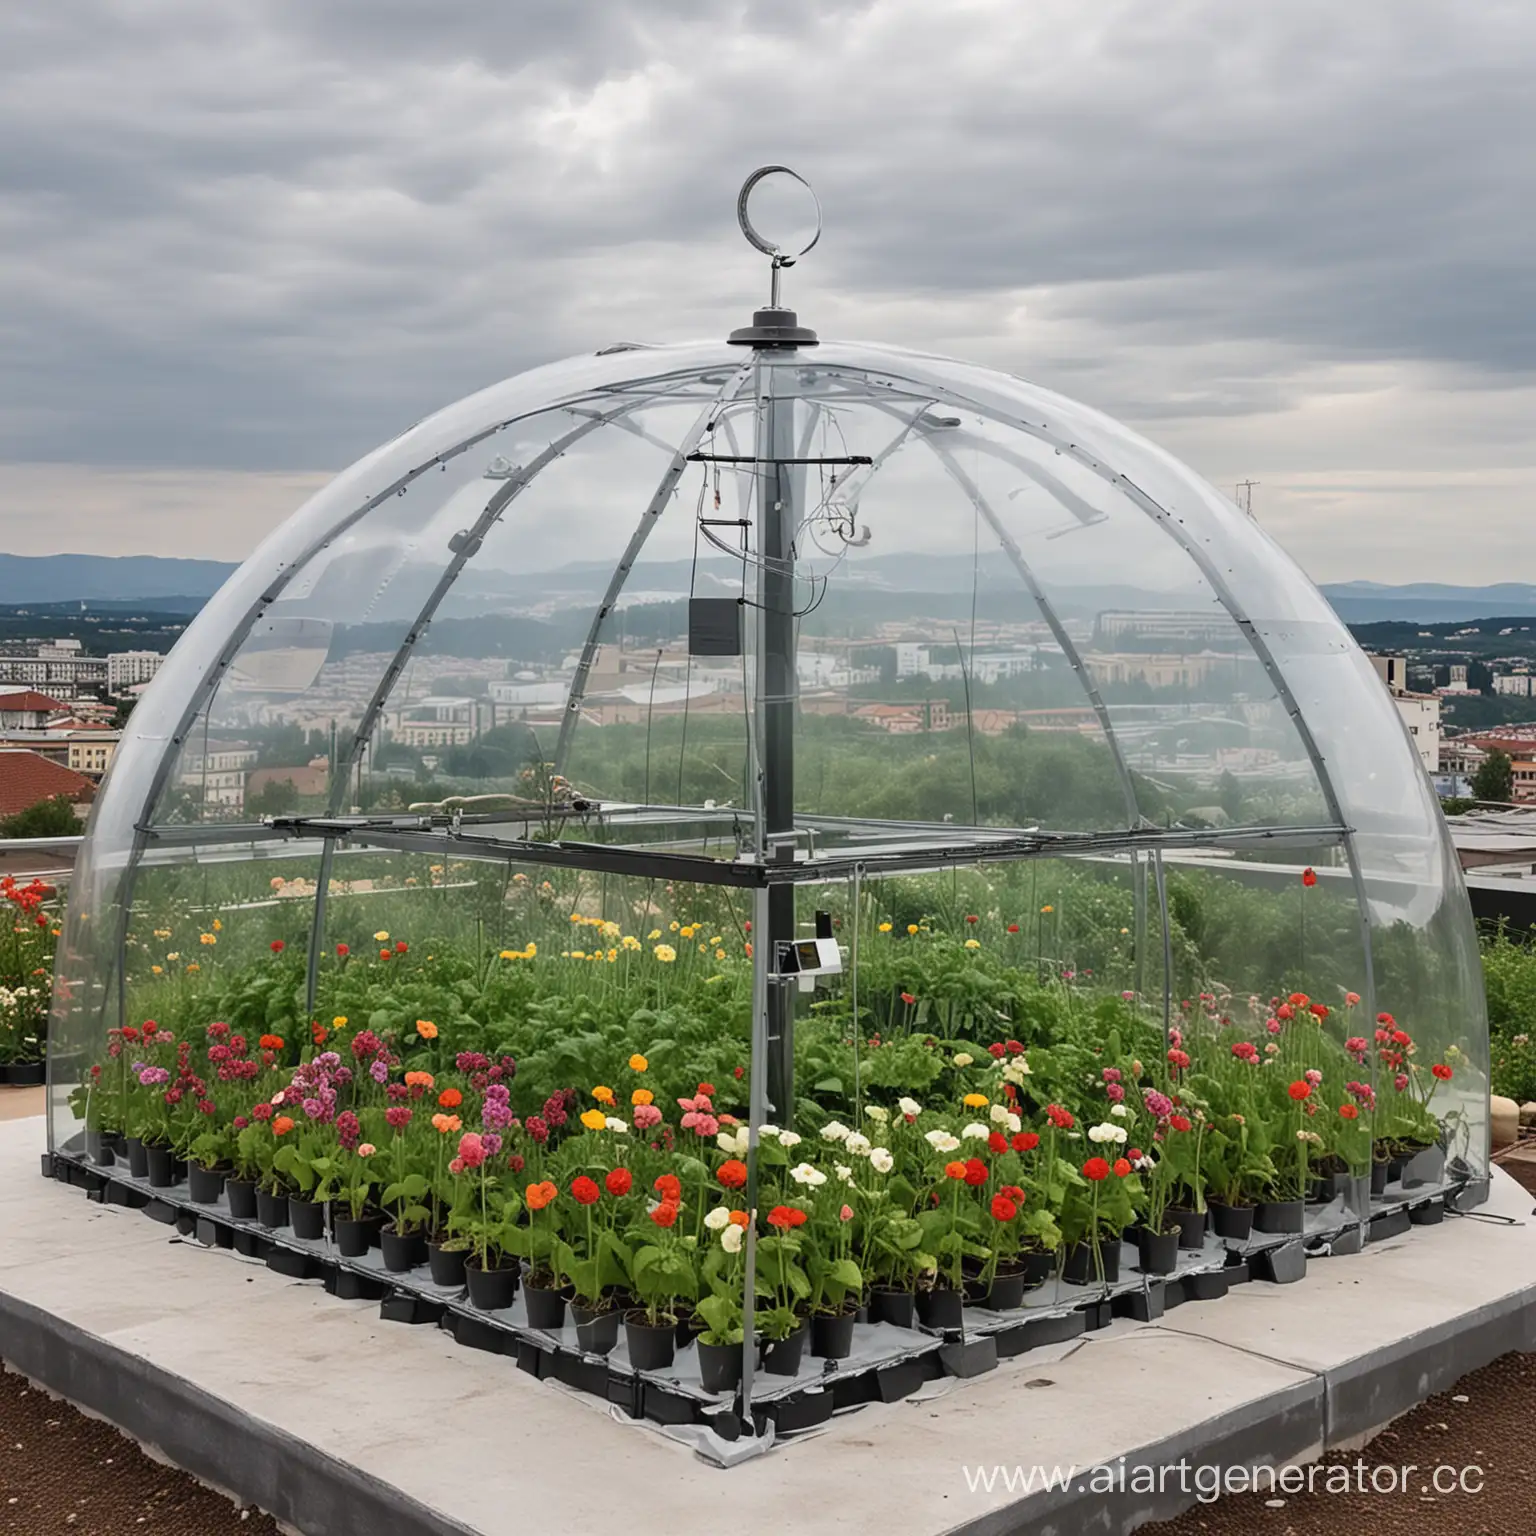 Urban-Rooftop-Meteostation-with-Glass-Dome-and-Greenery